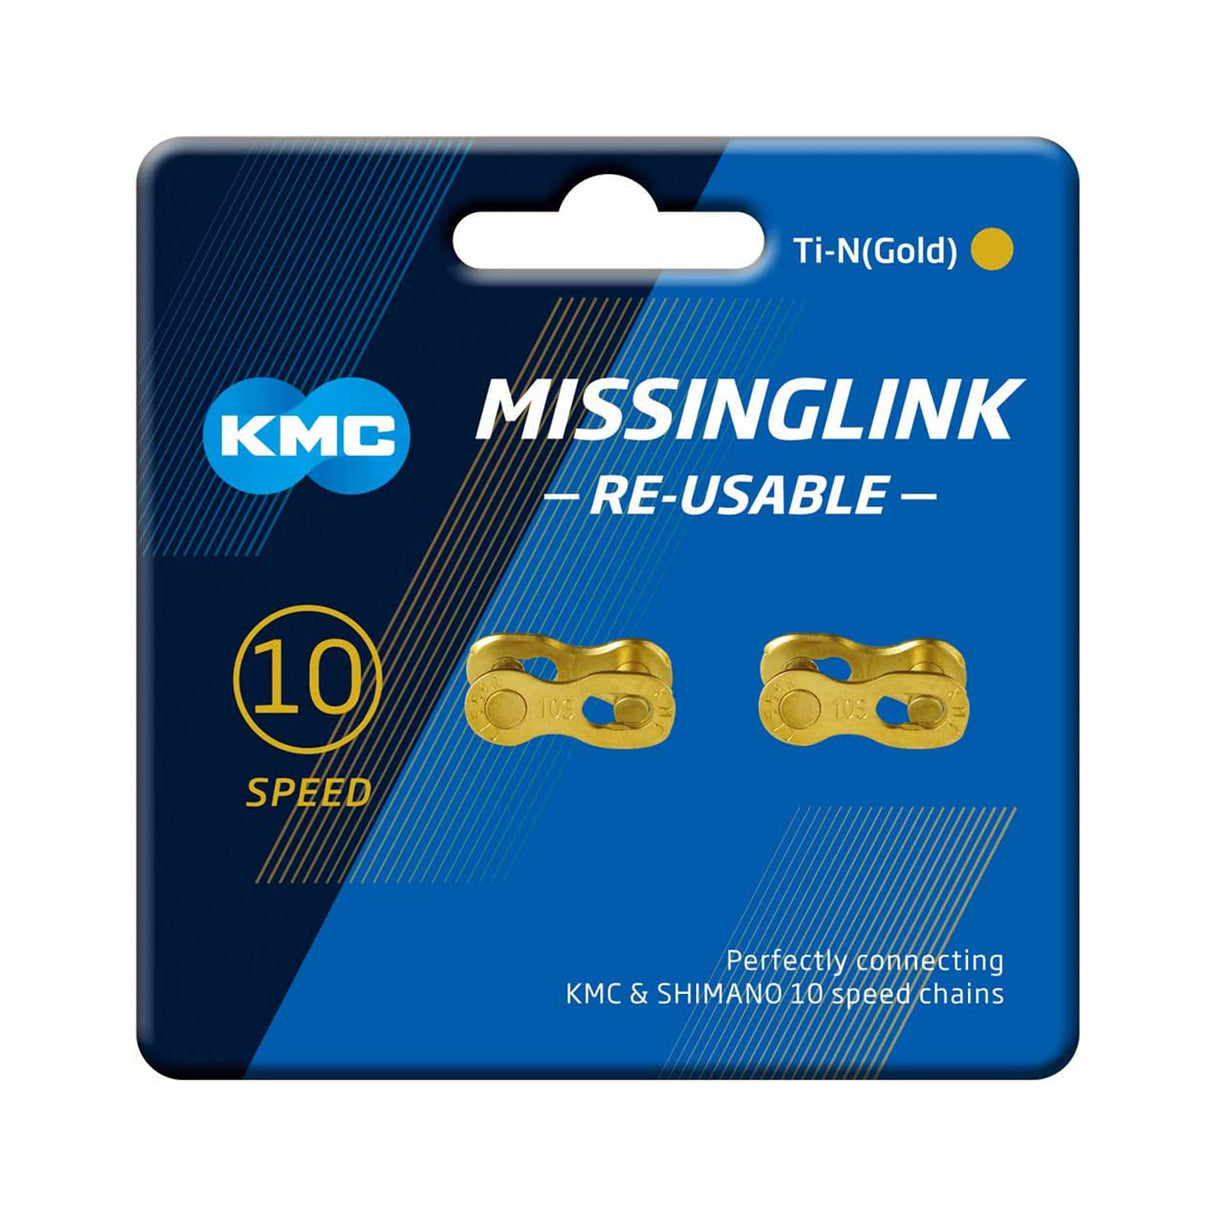 KMC CL559R Ti-N Missing Link 10 Speed Gold 2 Pairs